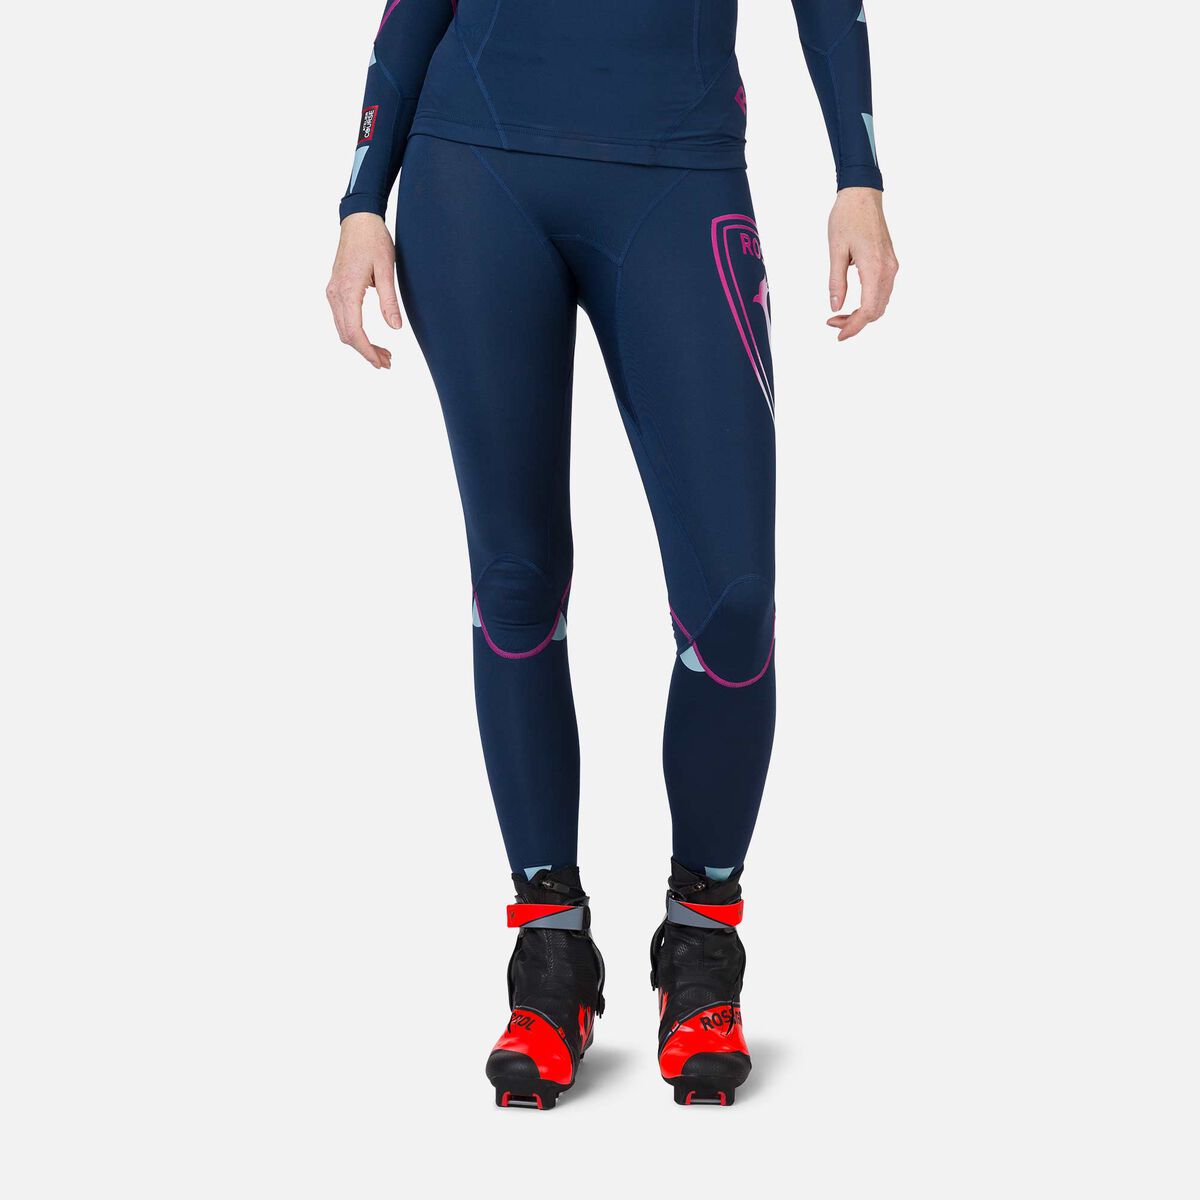 Women's compression jersey Rossignol Infini Race - Base layers - Women's  clothing - Winter Sports